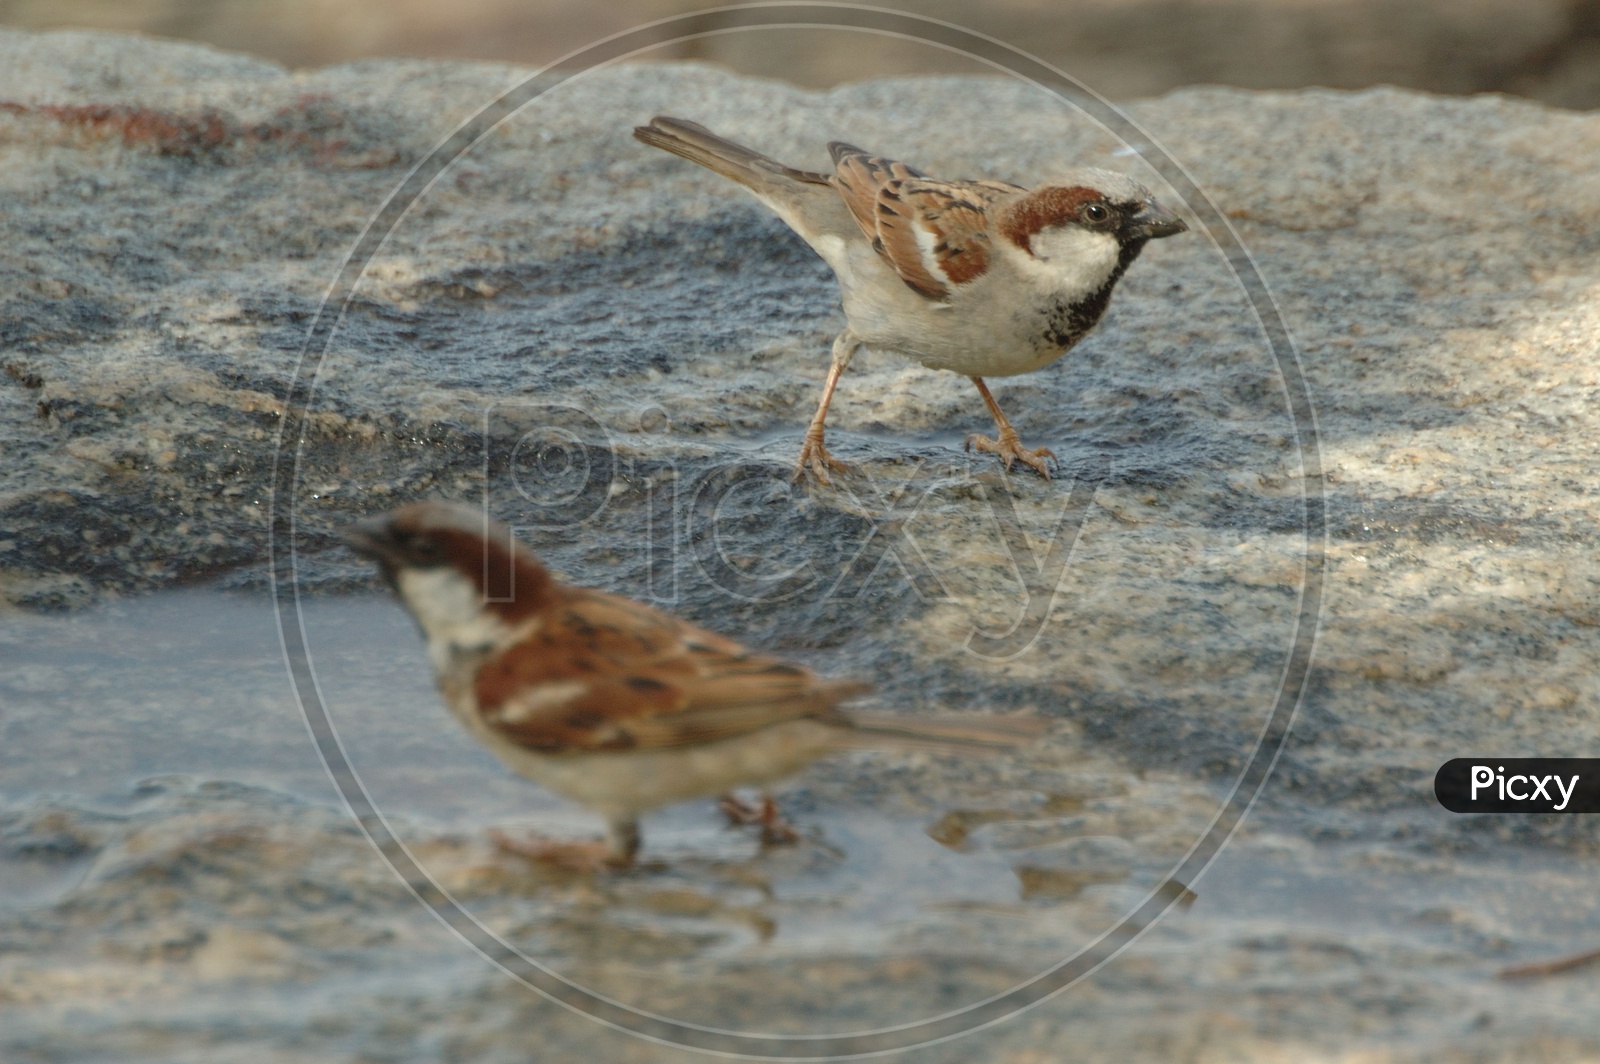 A couple of field sparrows playing in the water